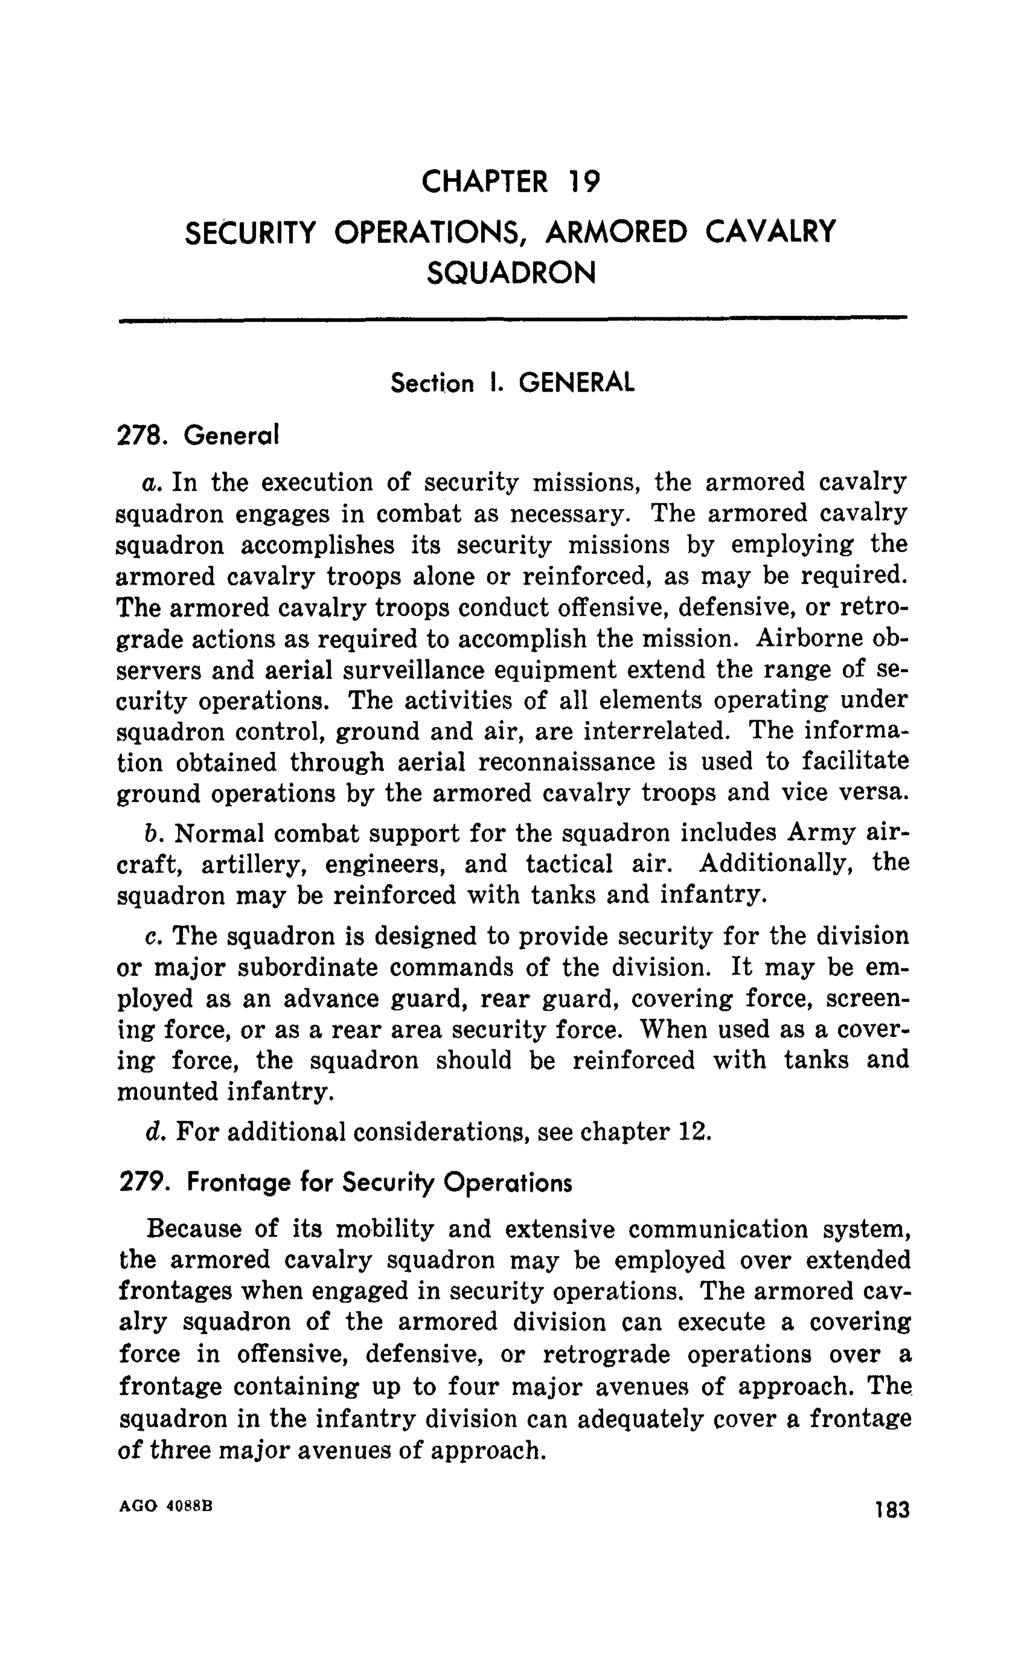 CHAPTER 19 SECURITY OPERATIONS, ARMORED CAVALRY SQUADRON 278. General Section I. GENERAL a. In the execution of security missions, the armored cavalry squadron engages in combat as necessary.